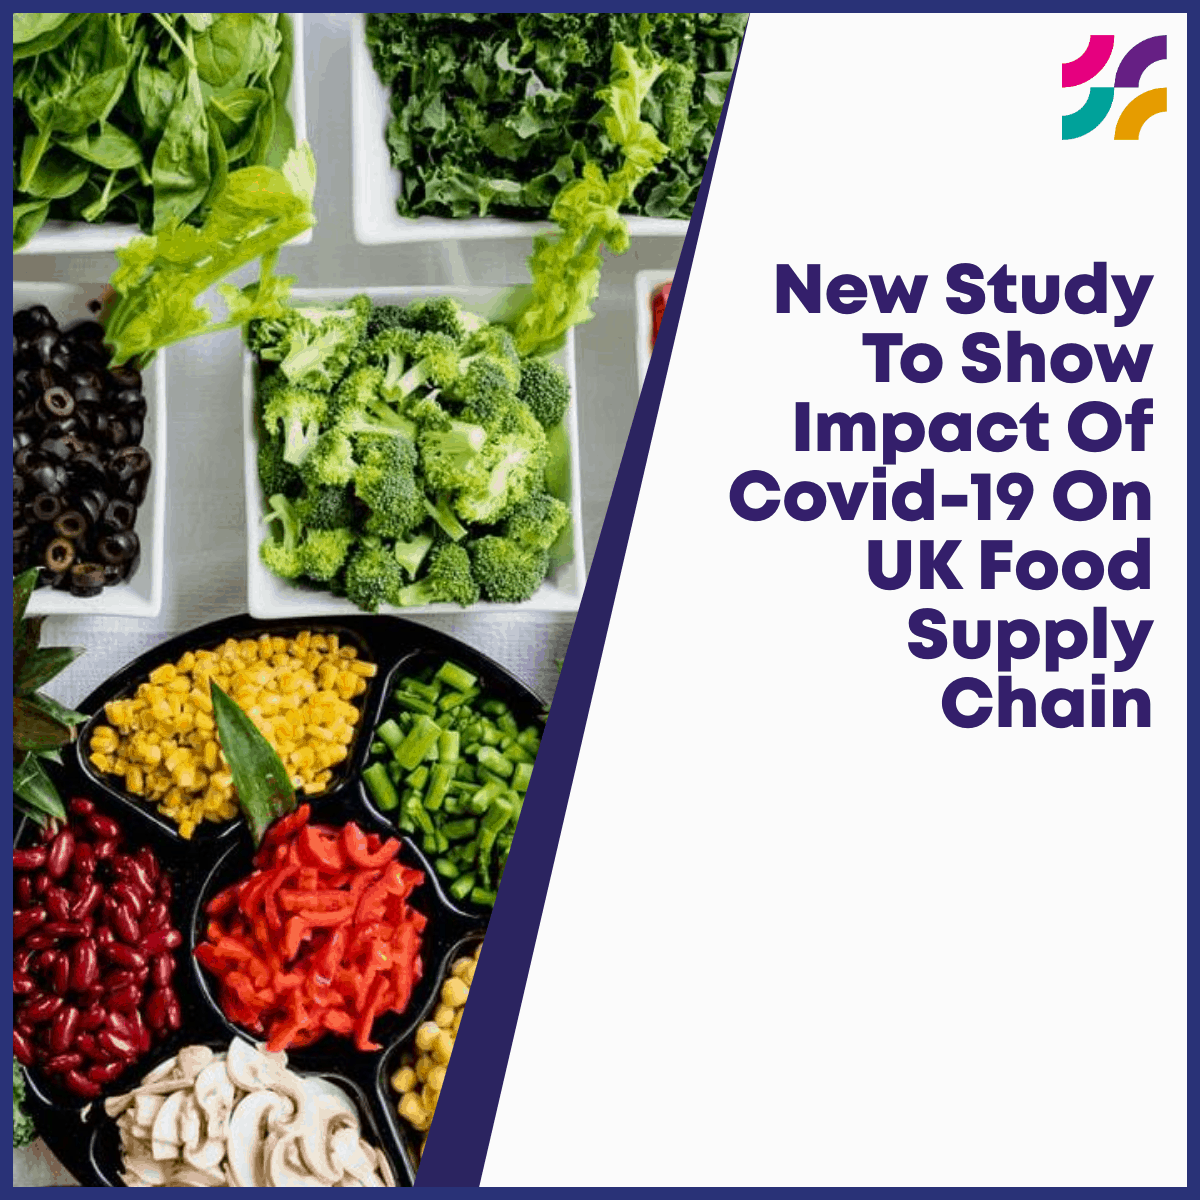 New Study To Show Impact Of Covid-19 On UK Food Supply Chain